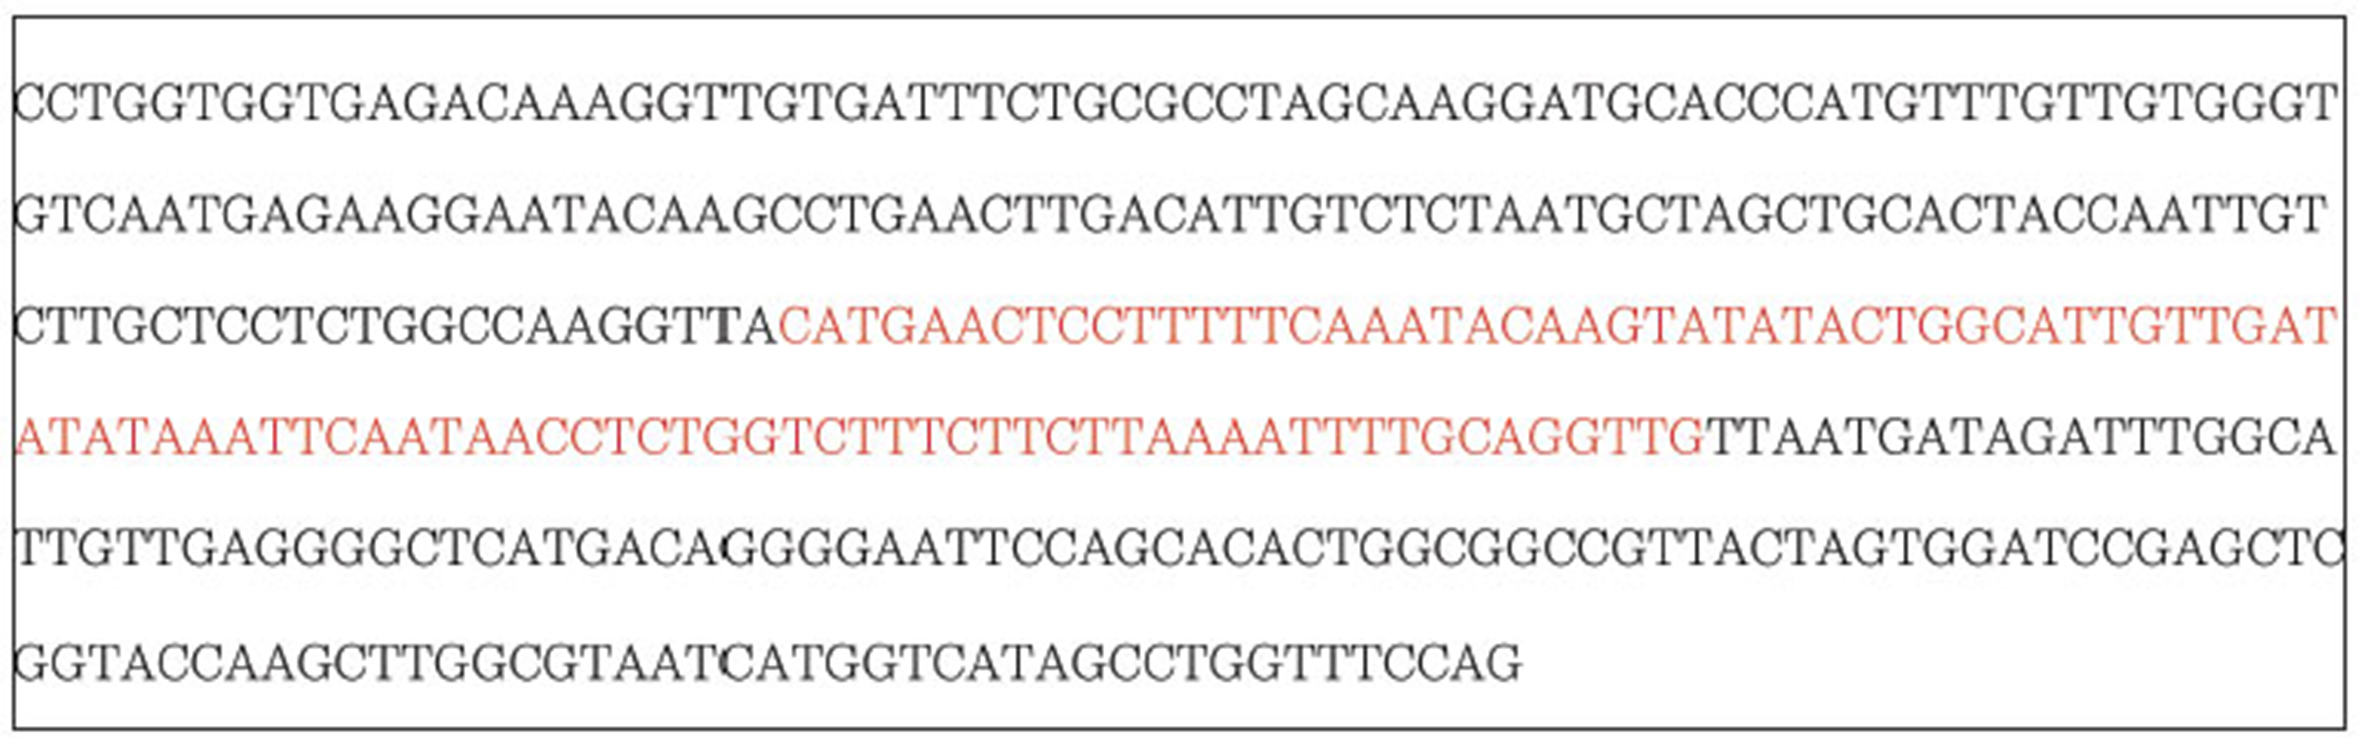 Determined DNA sequence of the wild ginseng pGAPDH-w gene. Novel sequences are in red.